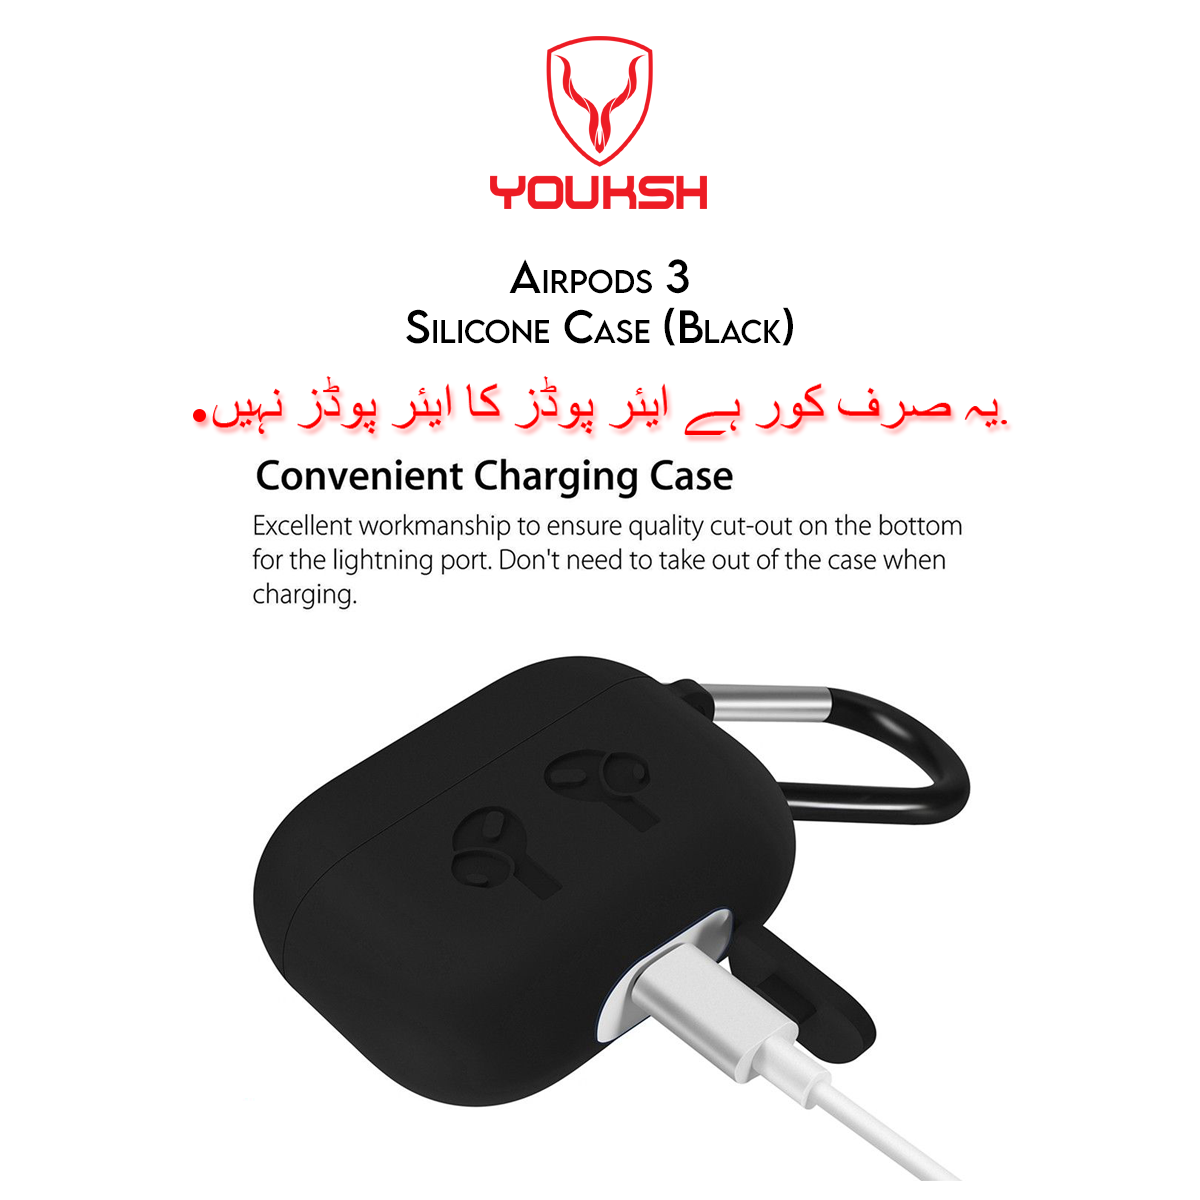 YOUKSH Airpods (Series 3) Silicone Case - Airpods (Series 3) Silicone Case - Airpods (Series 3) Silicone Rubber Cover - High Quality Shock Proof Case Only.